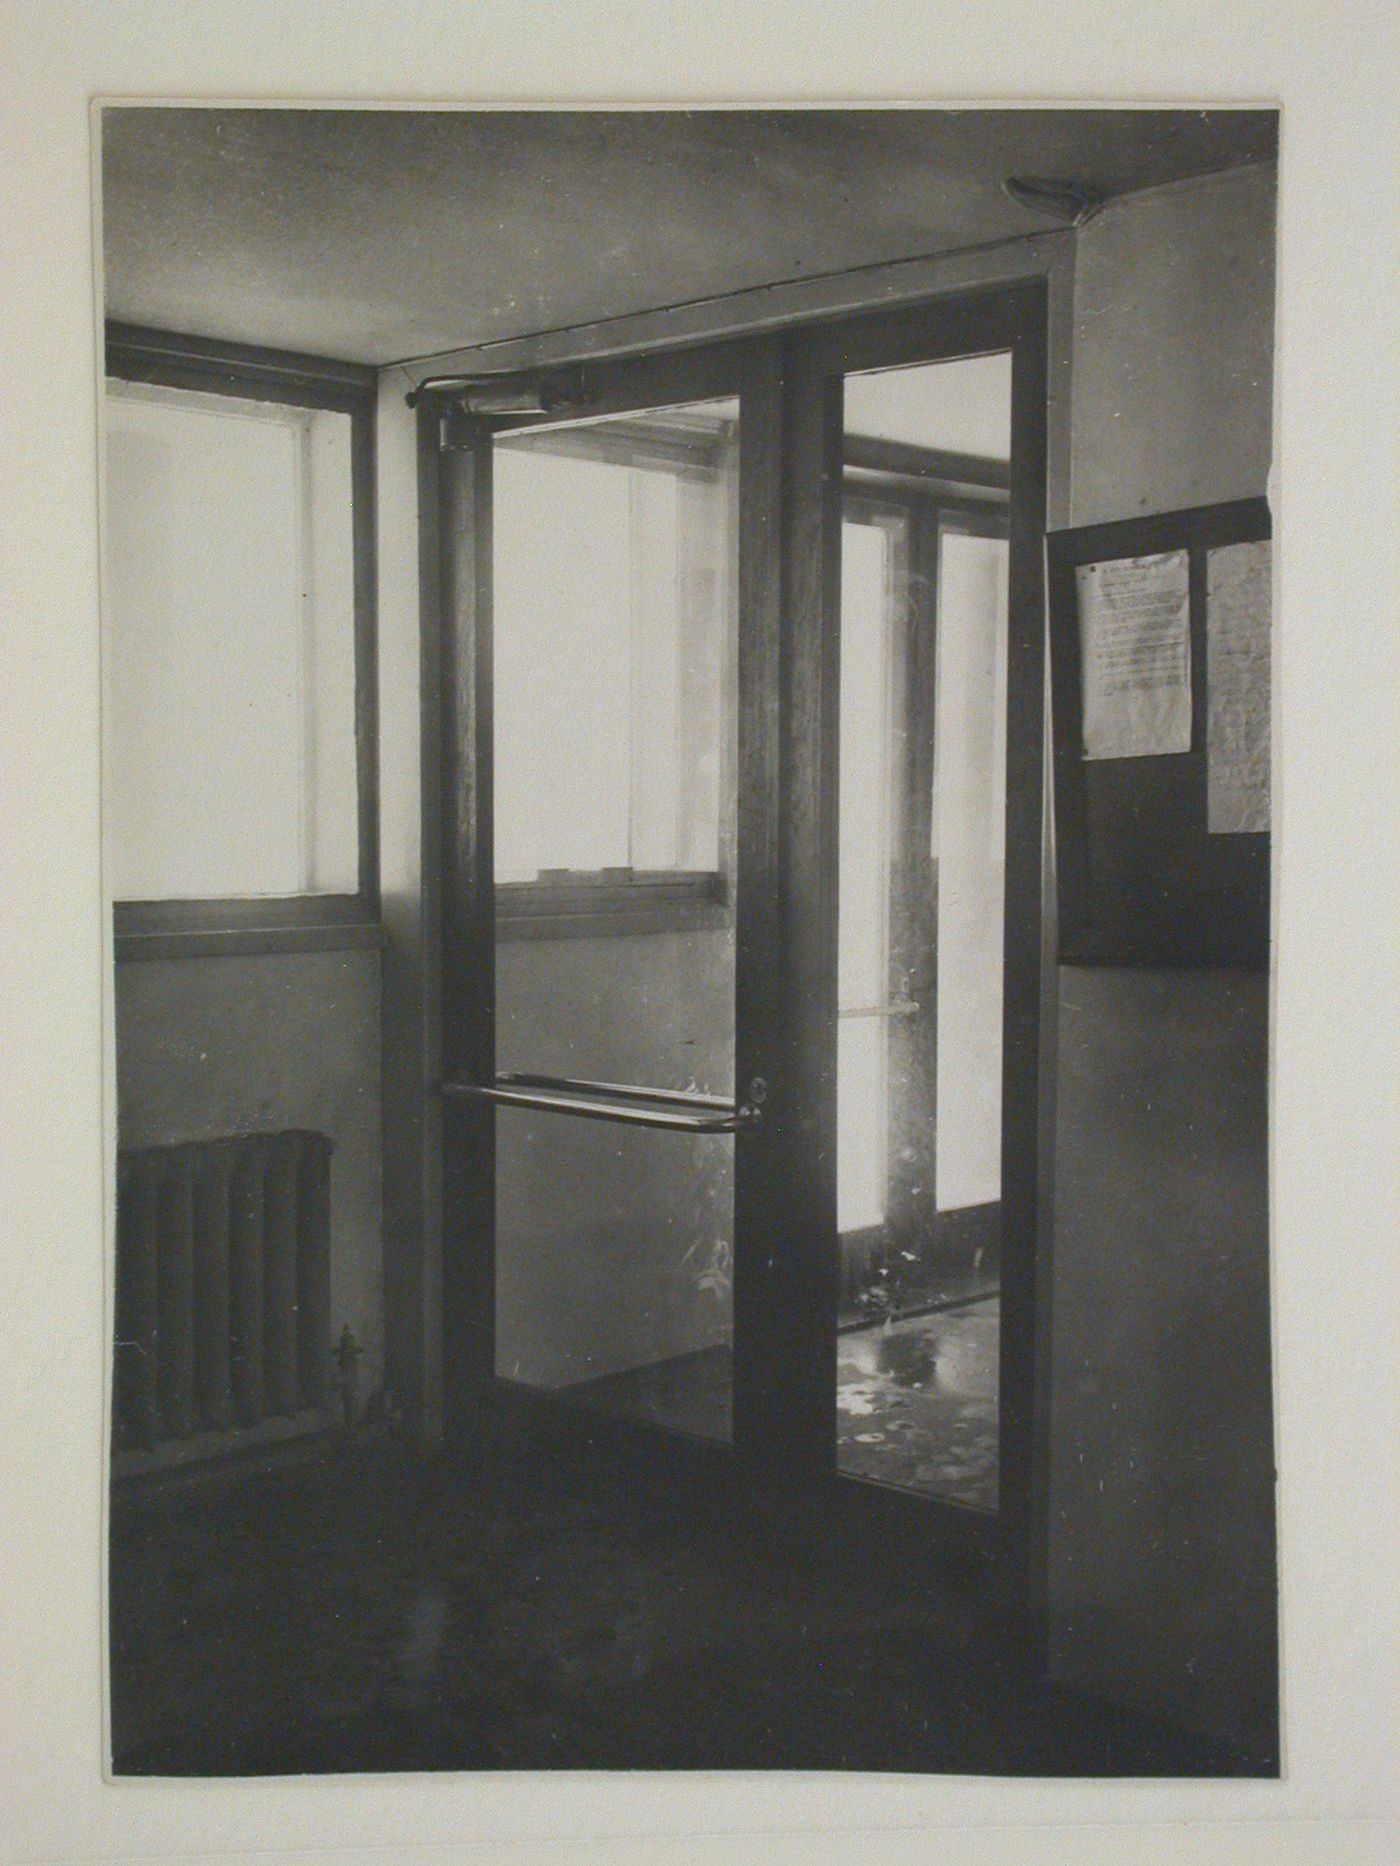 Interior view of an entrance to the People's Commissariat for Finance (Narkomfin) Apartment Building showing a bulletin board, 25 Novinskii Boulevard, Moscow